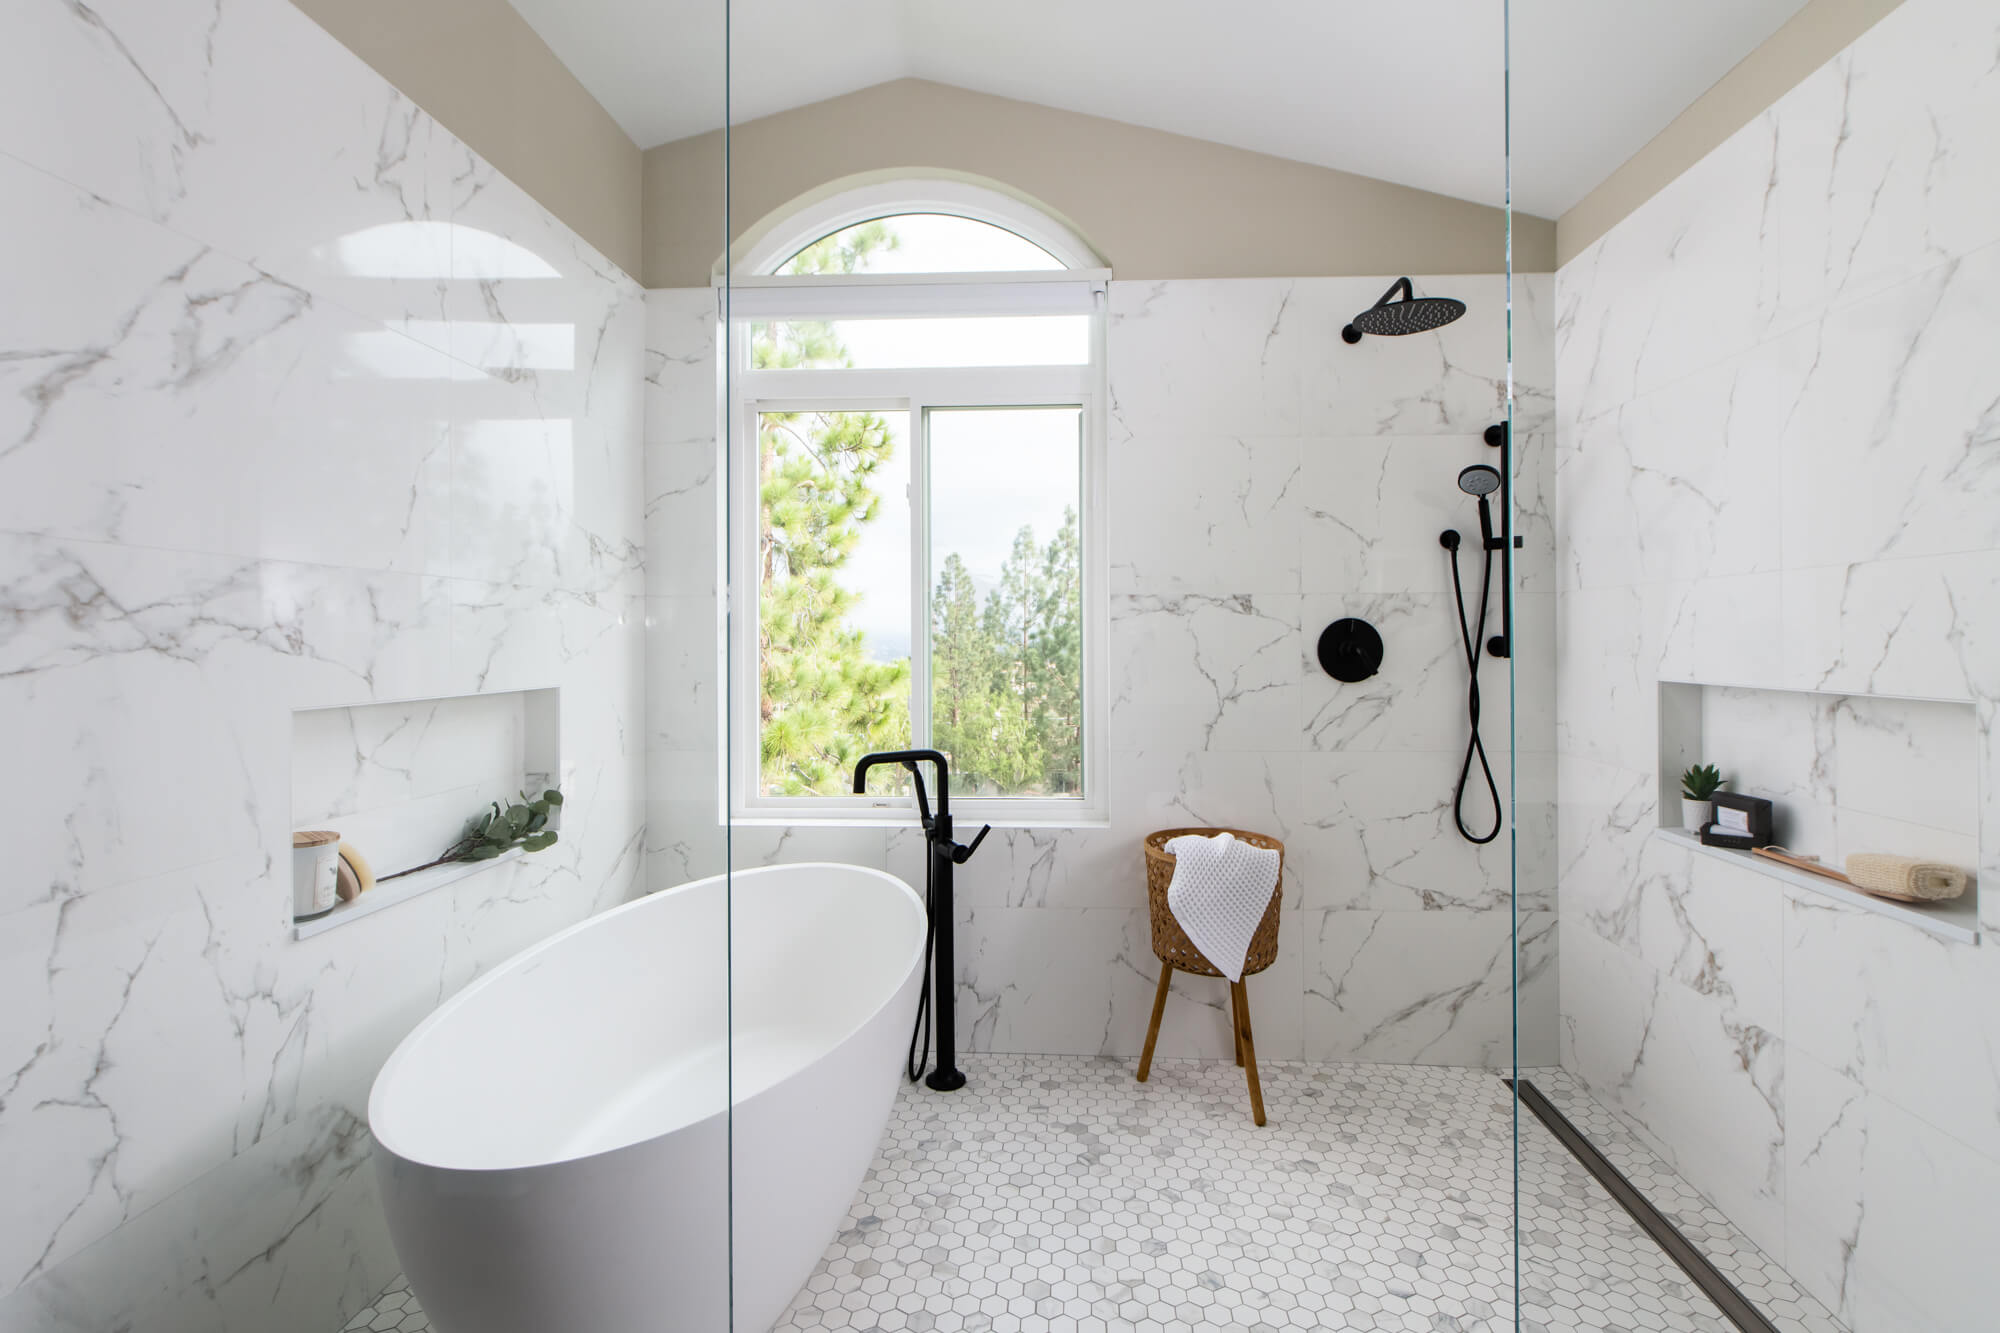 Modern Meets Eclectic in This Amazing Bath Remodel